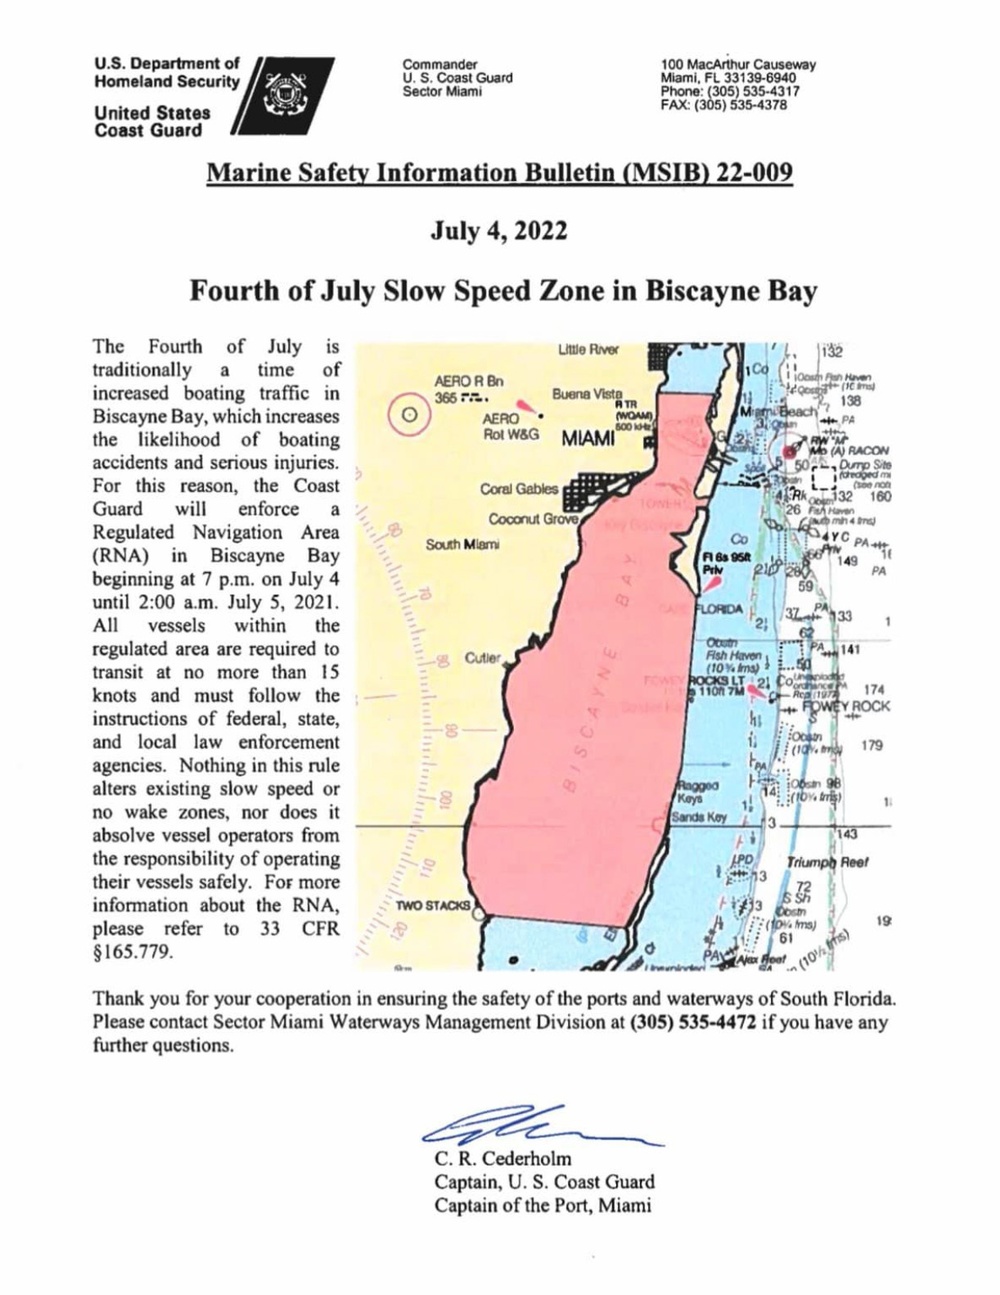 Marine Safety Information Bulletin for July Fourth